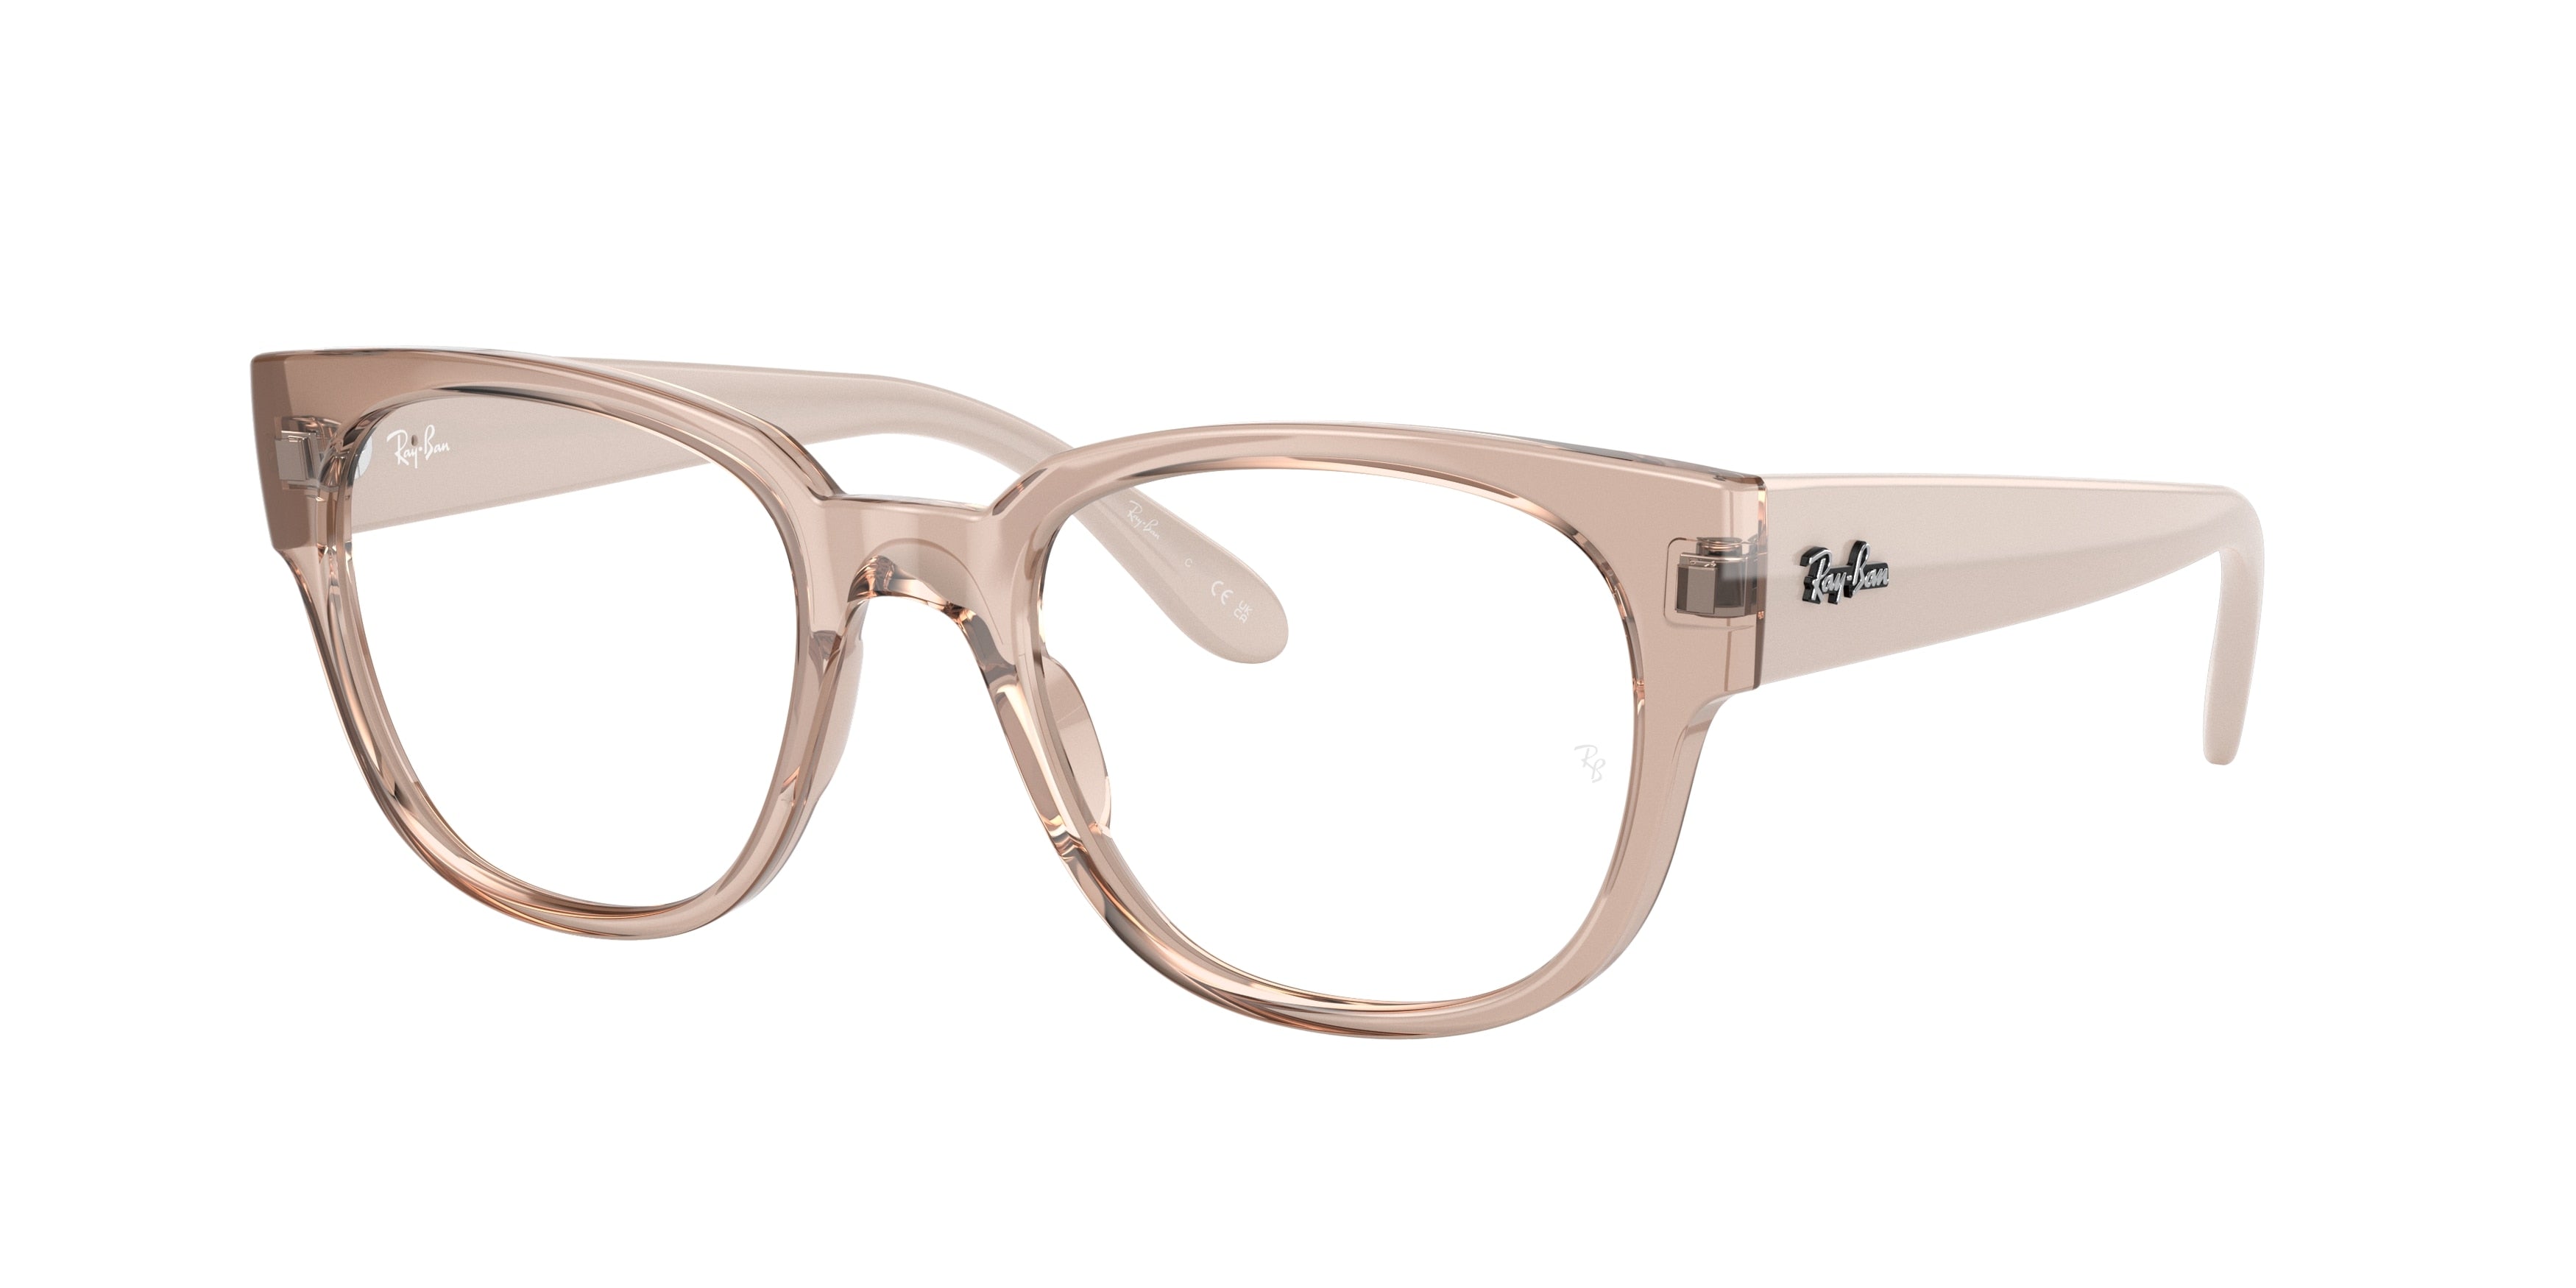 Ray-Ban Optical RX7210 Square Eyeglasses  8203-Alabaster 52-145-20 - Color Map White